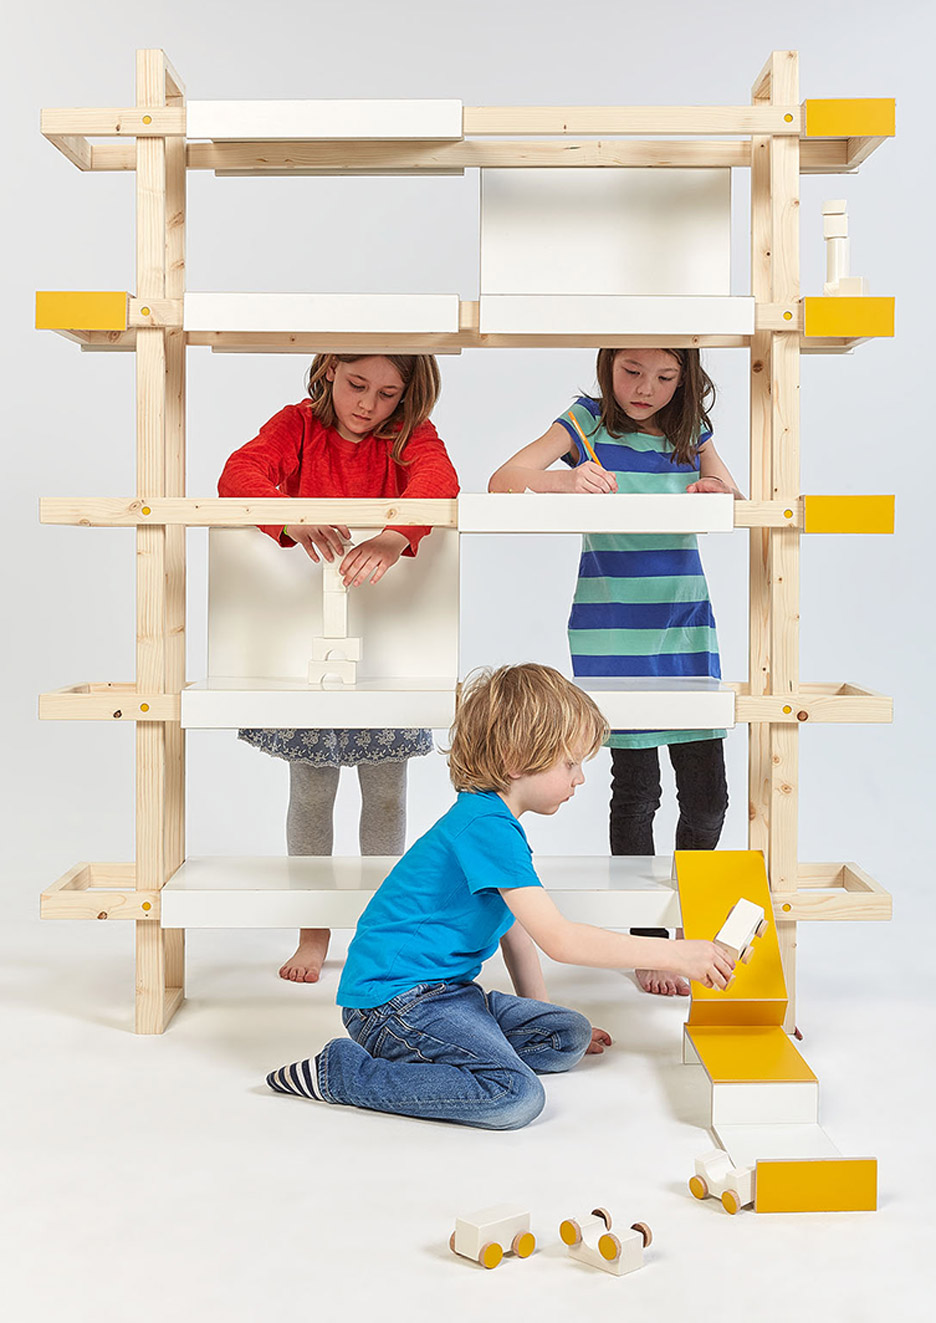 Children furniture collection that engages kids in play  4